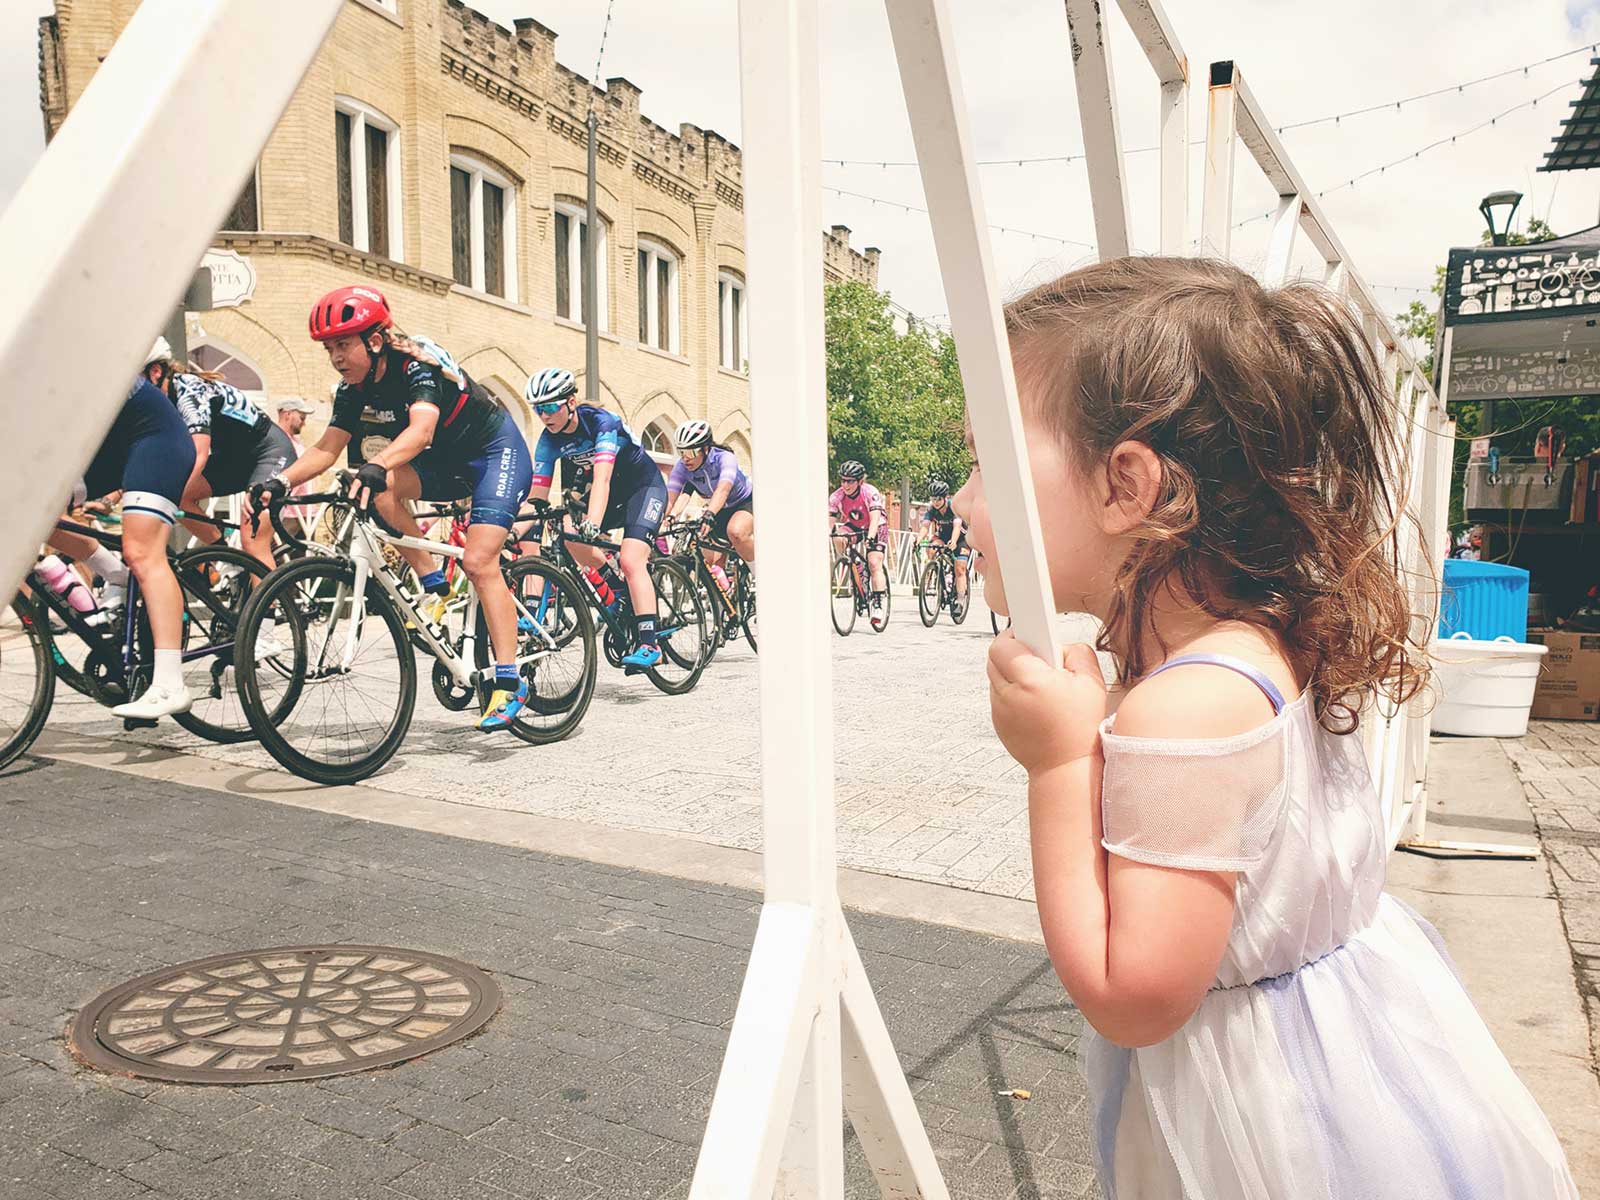 A little girl watches a bike race through the barriers. Photo by Jason McDowell.